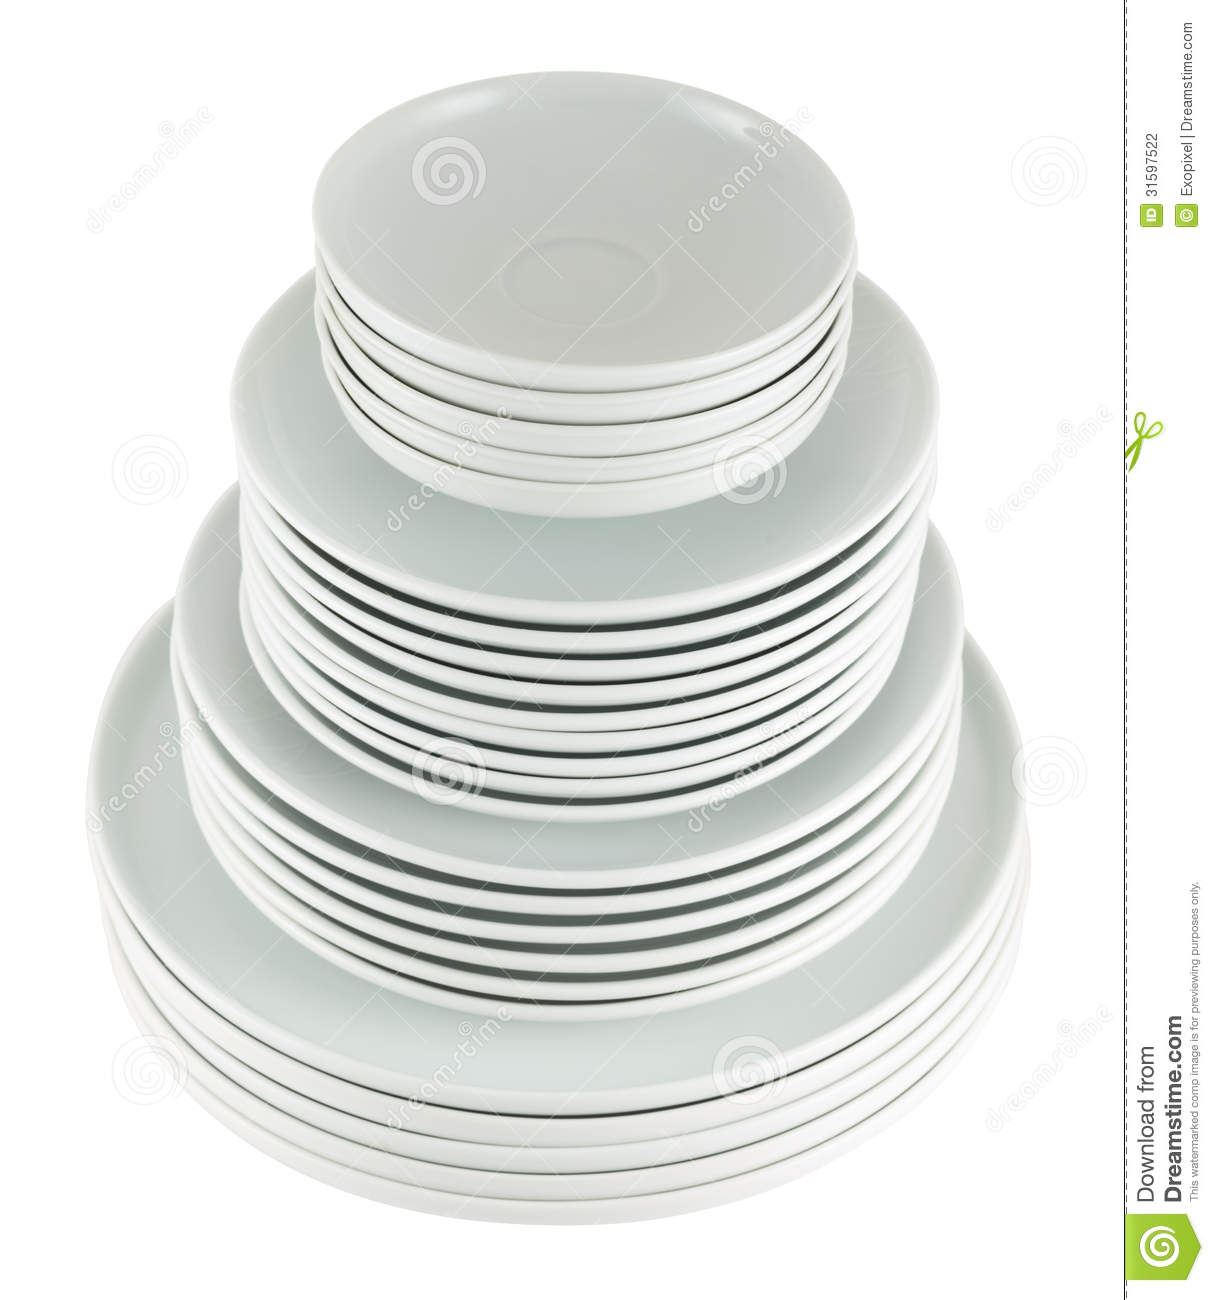 Stack Of Dishes Clipart Pile Of Clean White Dish